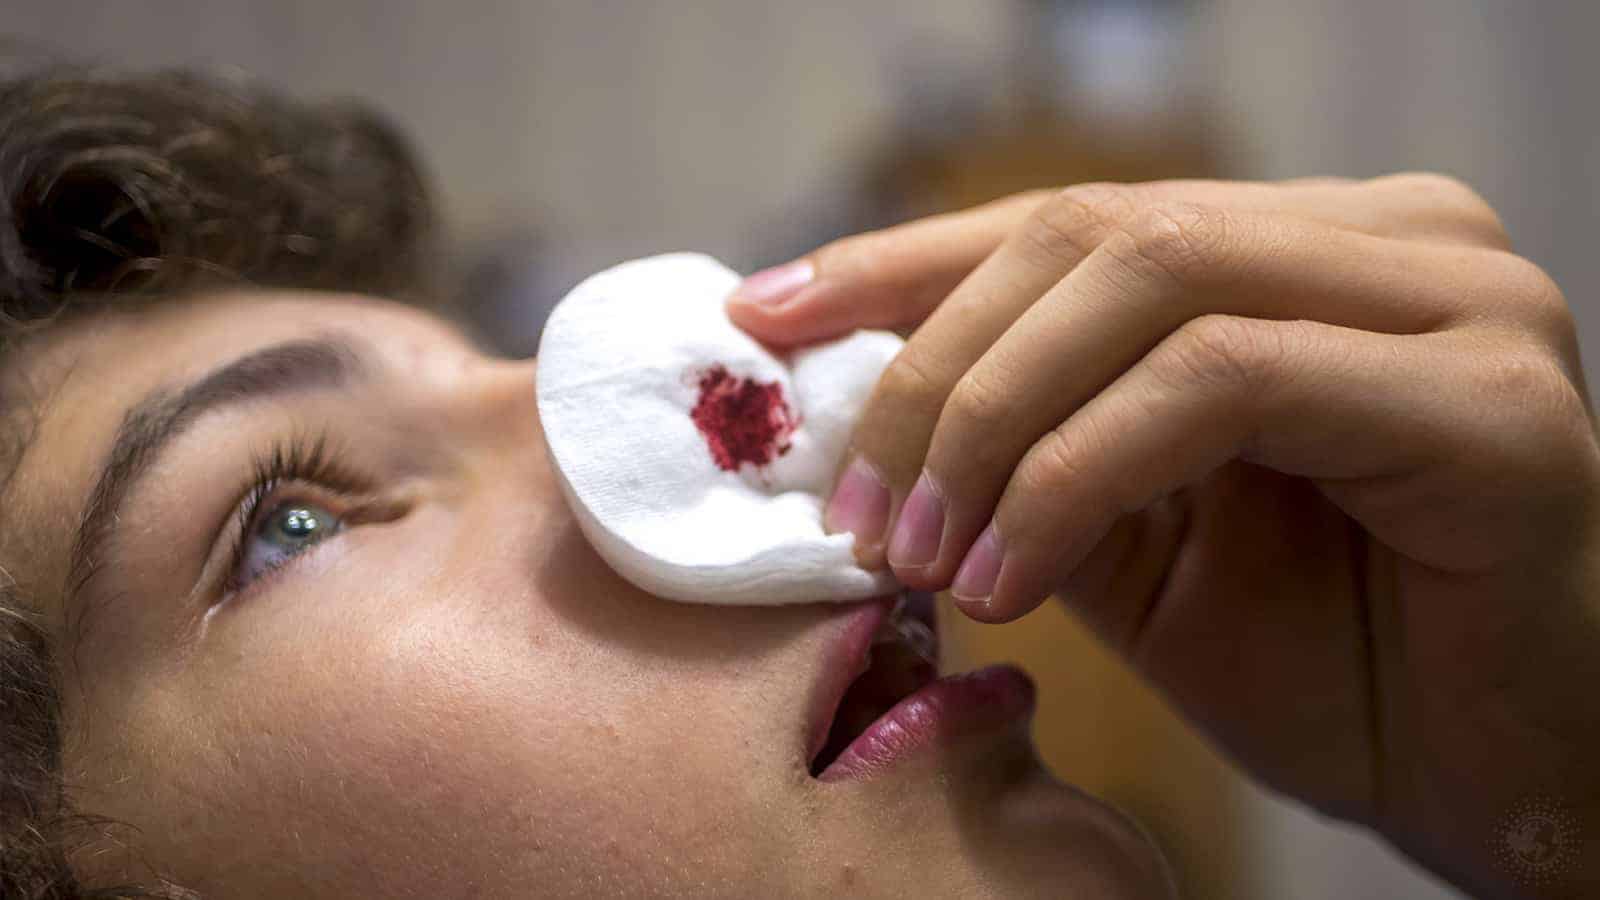 10 Things That Cause a Nosebleed (and How to Stop It)